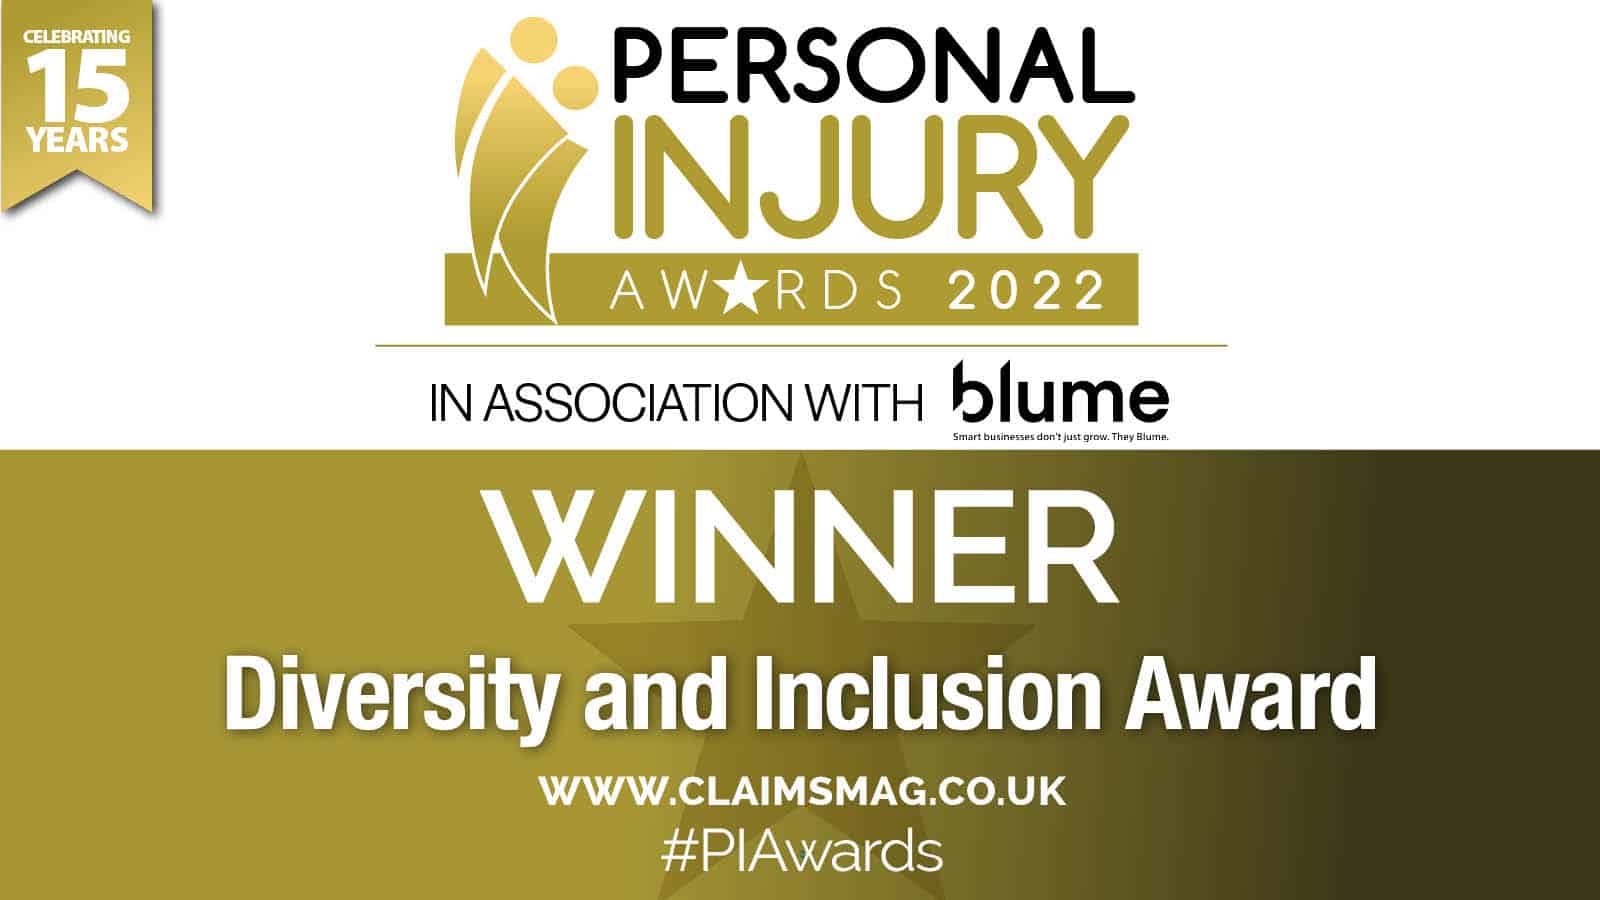 Parklane Plowden Chambers is the winner of the ‘Diversity and Inclusion Award’ at the Personal Injury Awards 2022